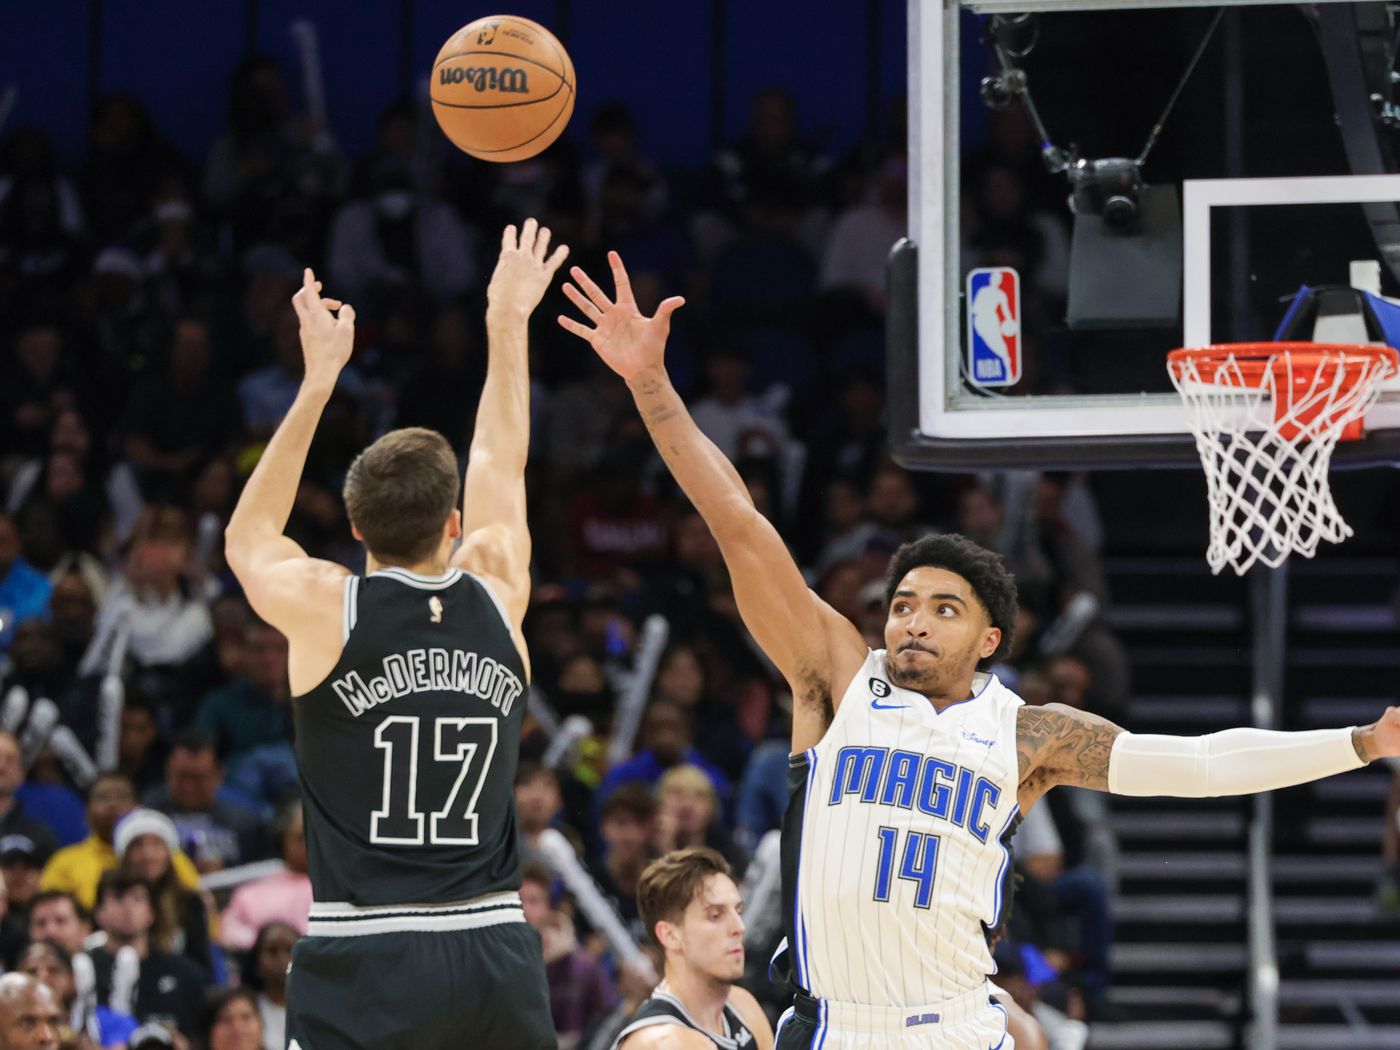 Orlando Magic fans won't get a brand change, but will get new